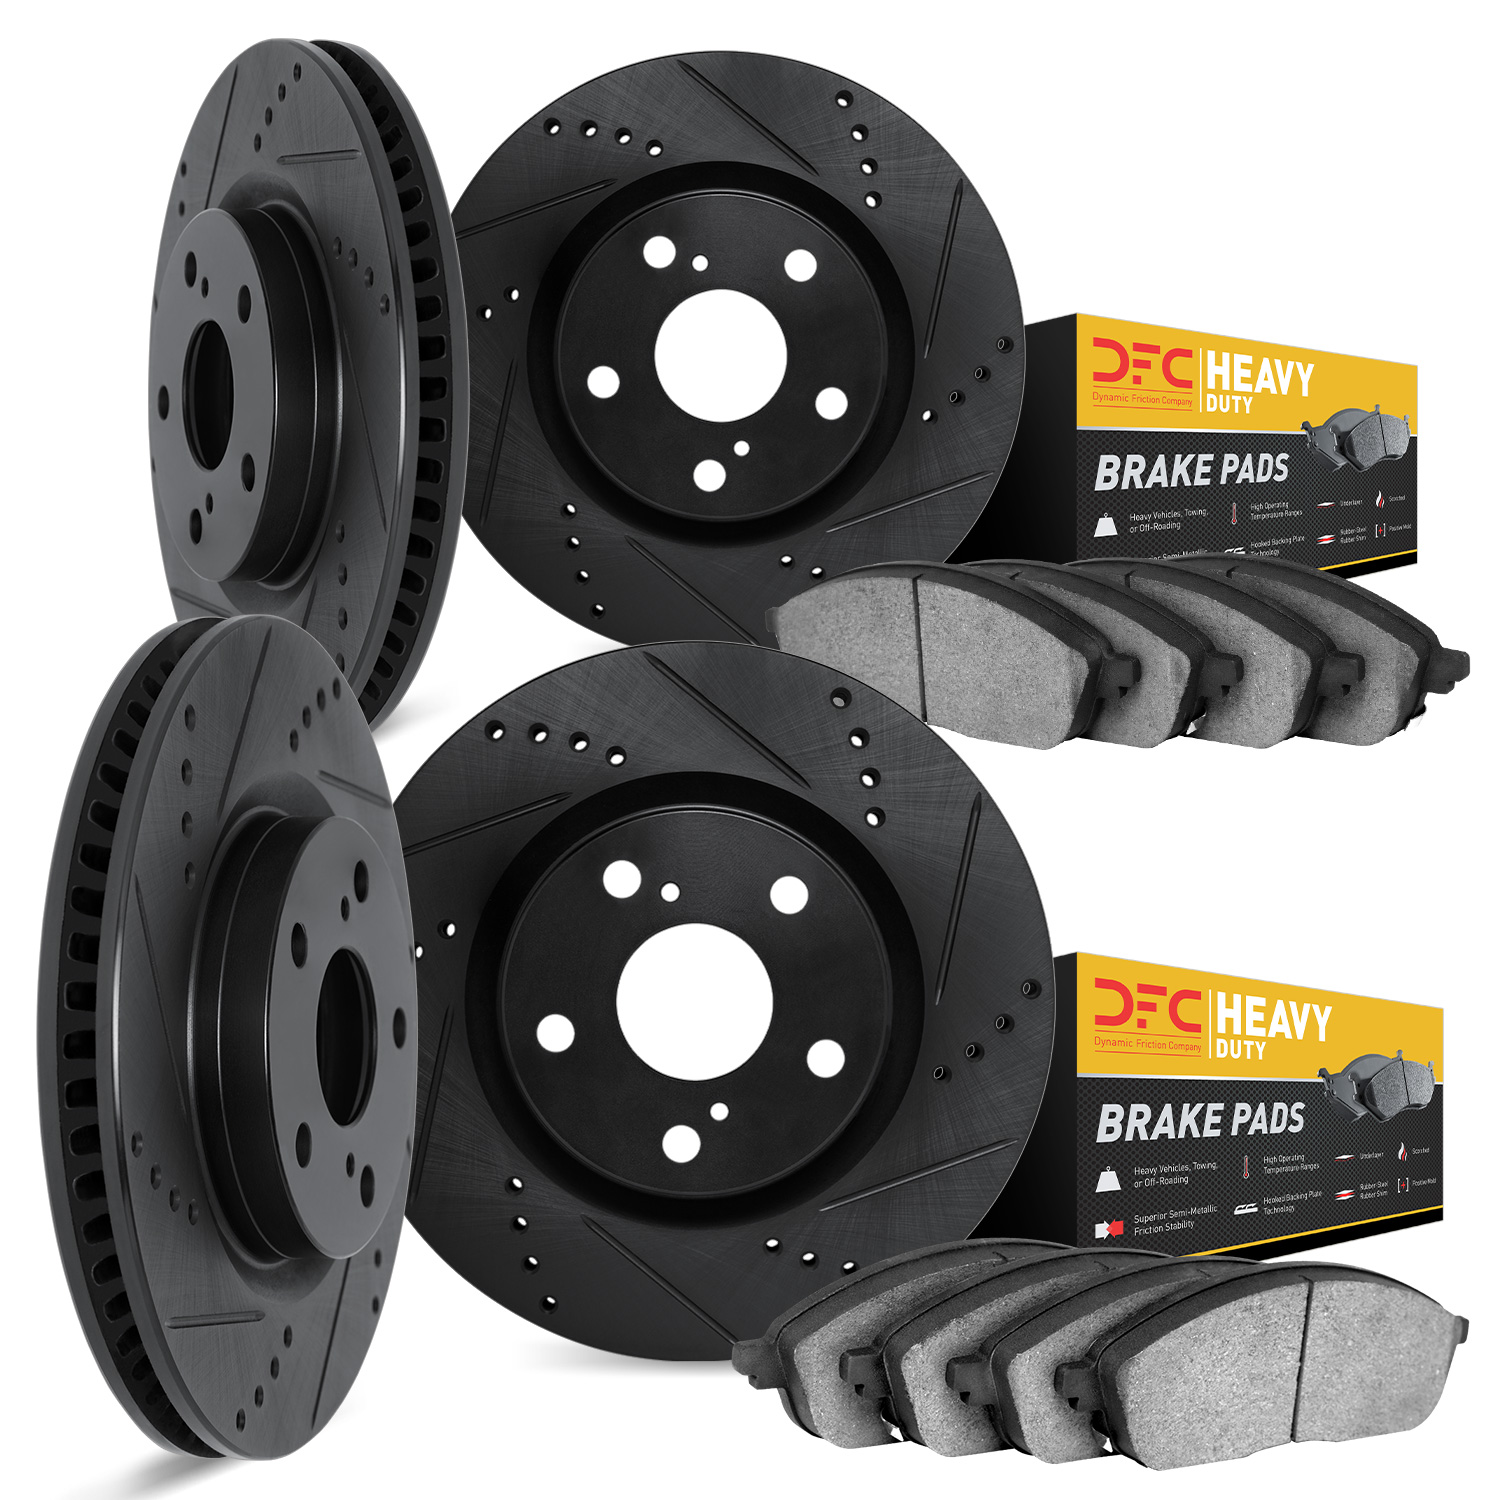 8204-76006 Drilled/Slotted Rotors w/Heavy-Duty Brake Pads Kit [Silver], Fits Select Lexus/Toyota/Scion, Position: Front and Rear